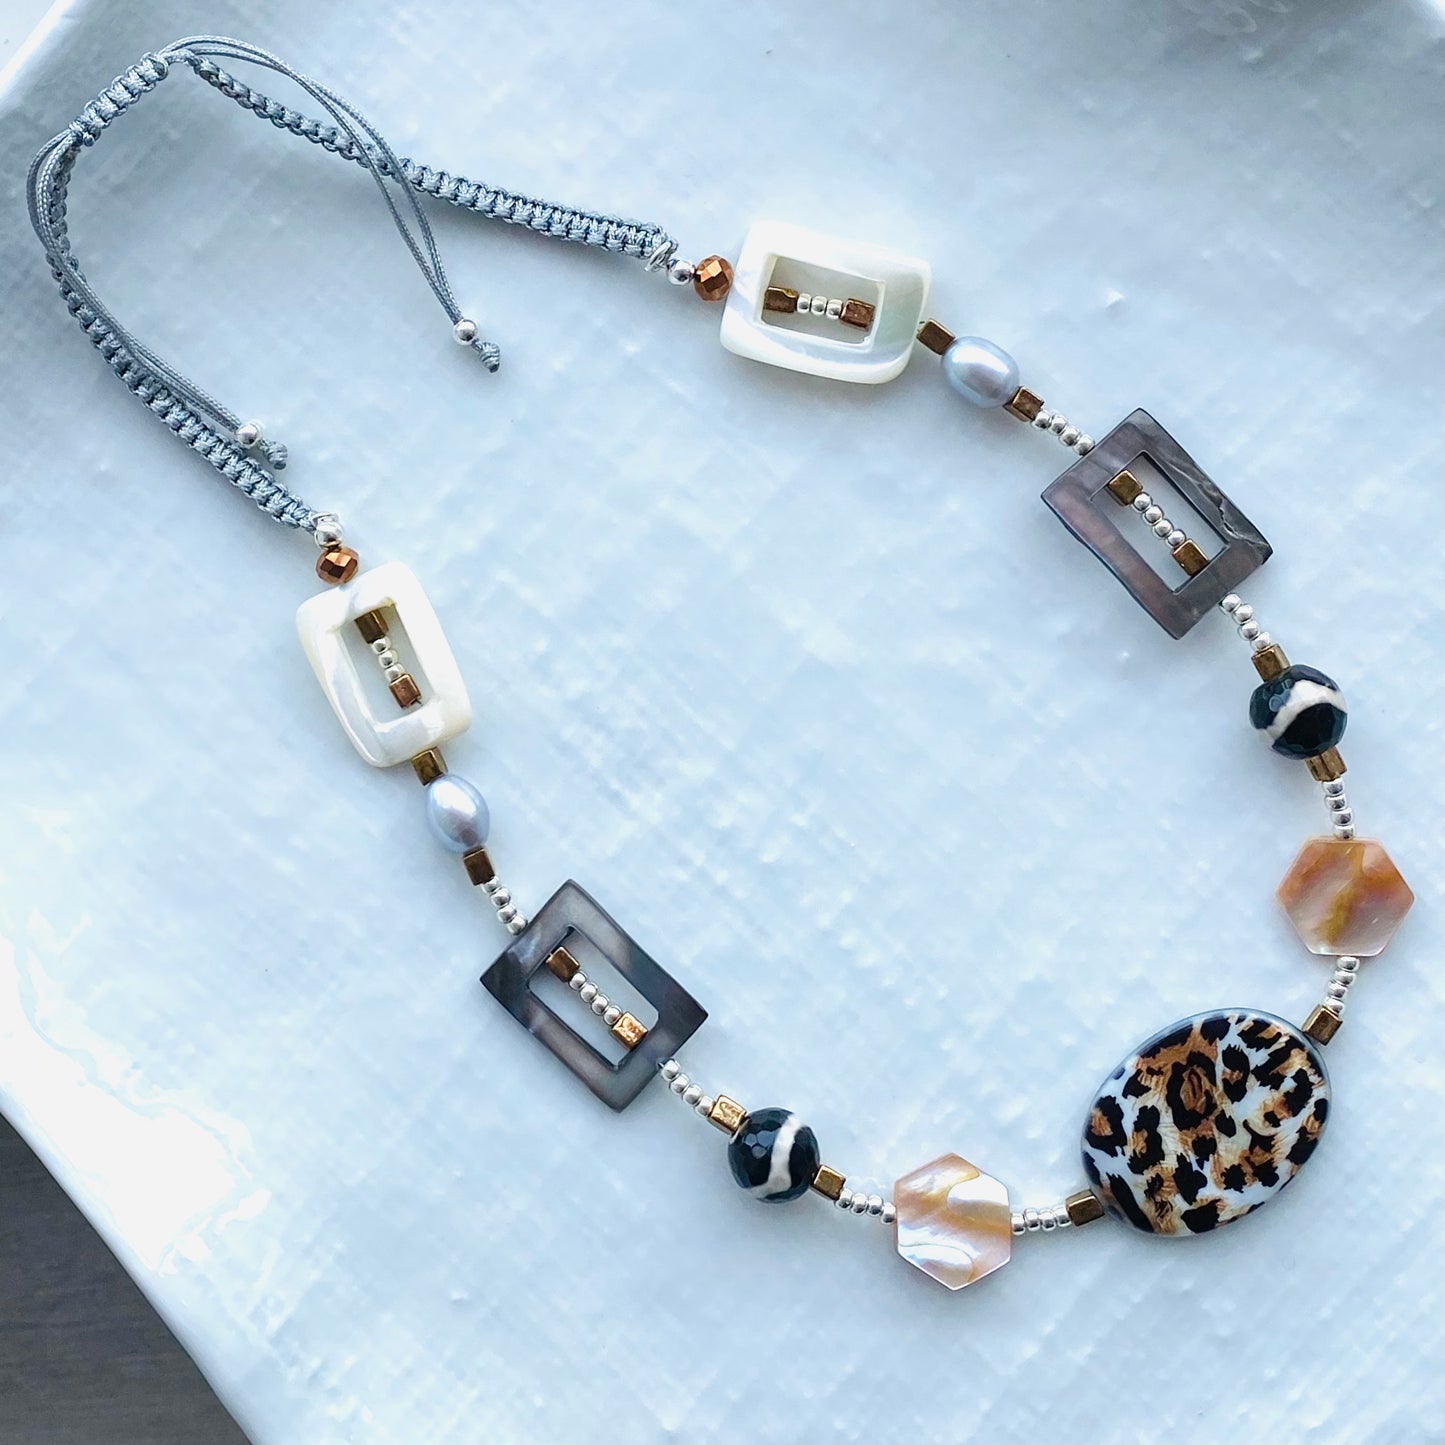 The Ultimate neutral necklace